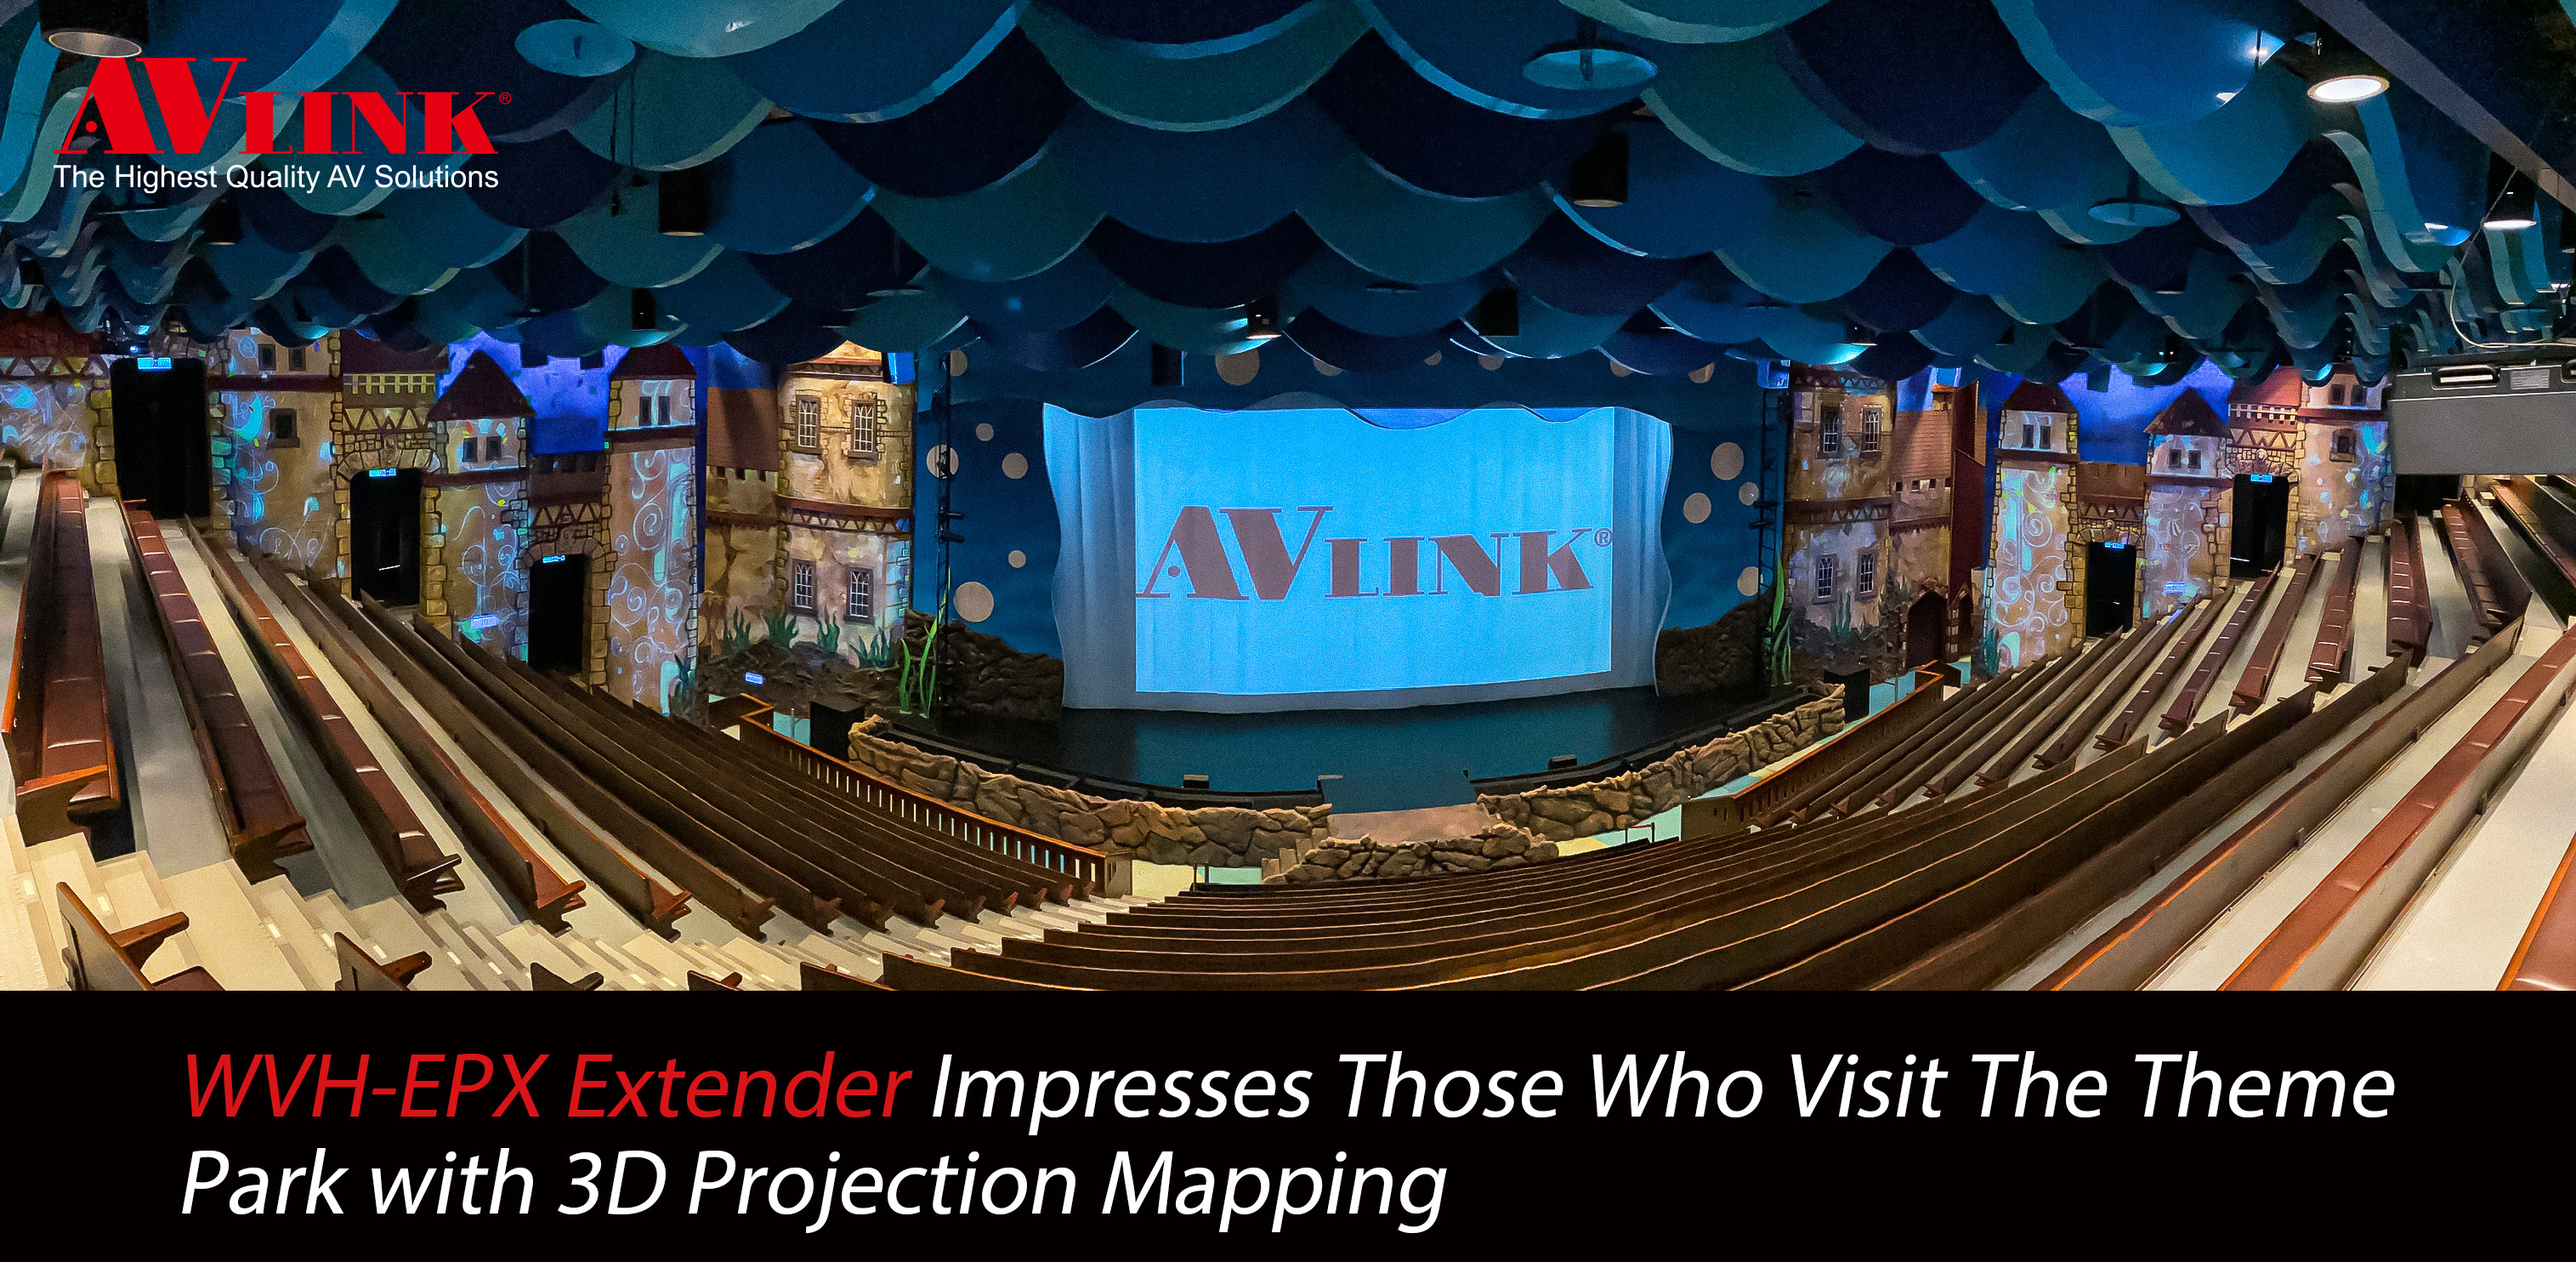 WVH-EPX Extender Impresses Those Who Visit The Theme Park with 3D Projection Mapping